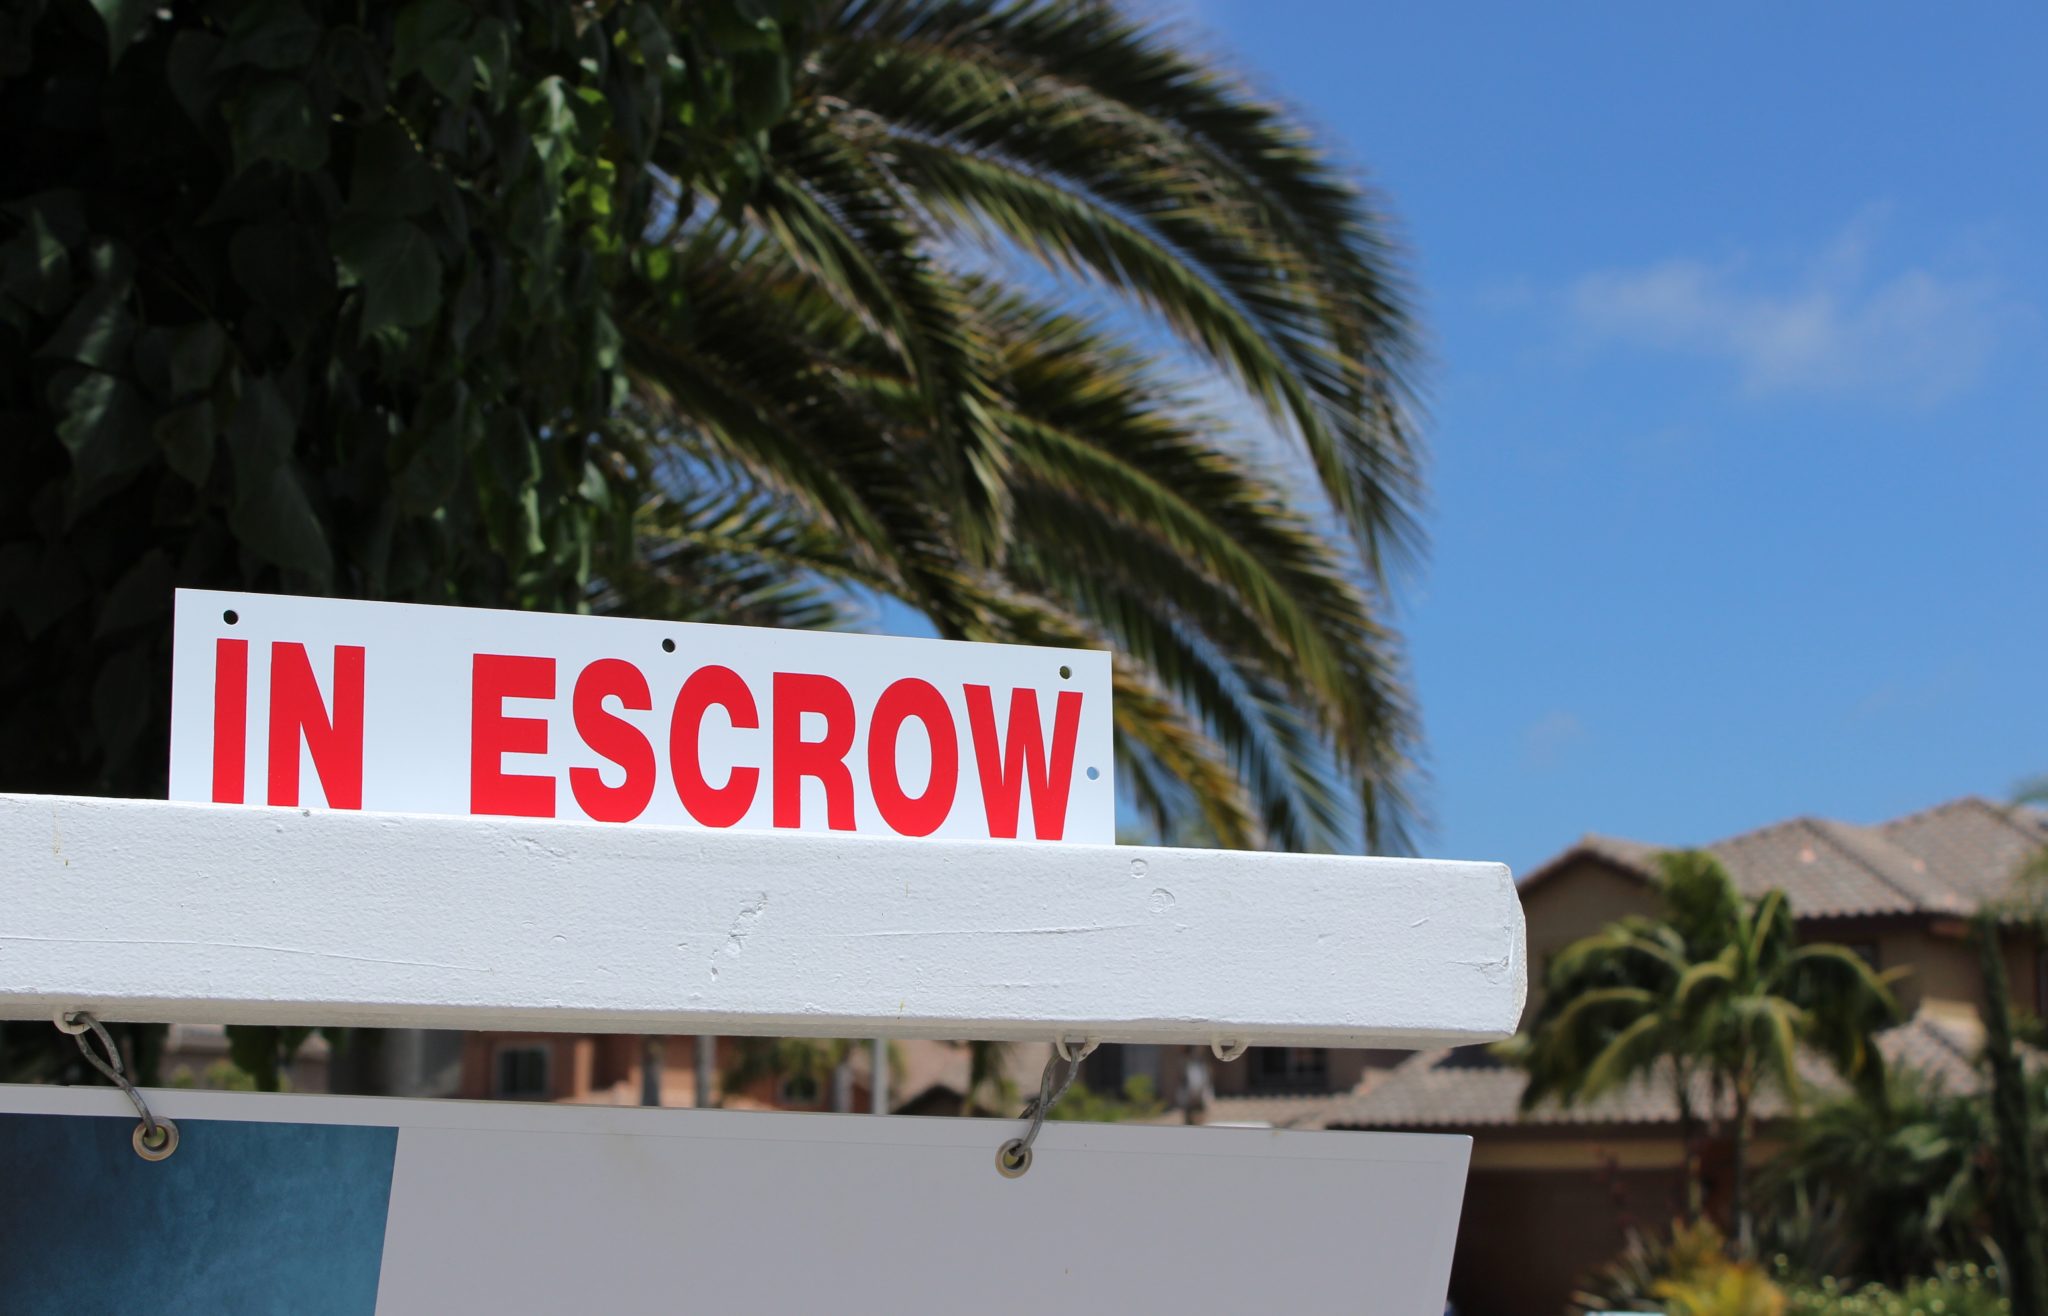 In escrow sign in front of house.